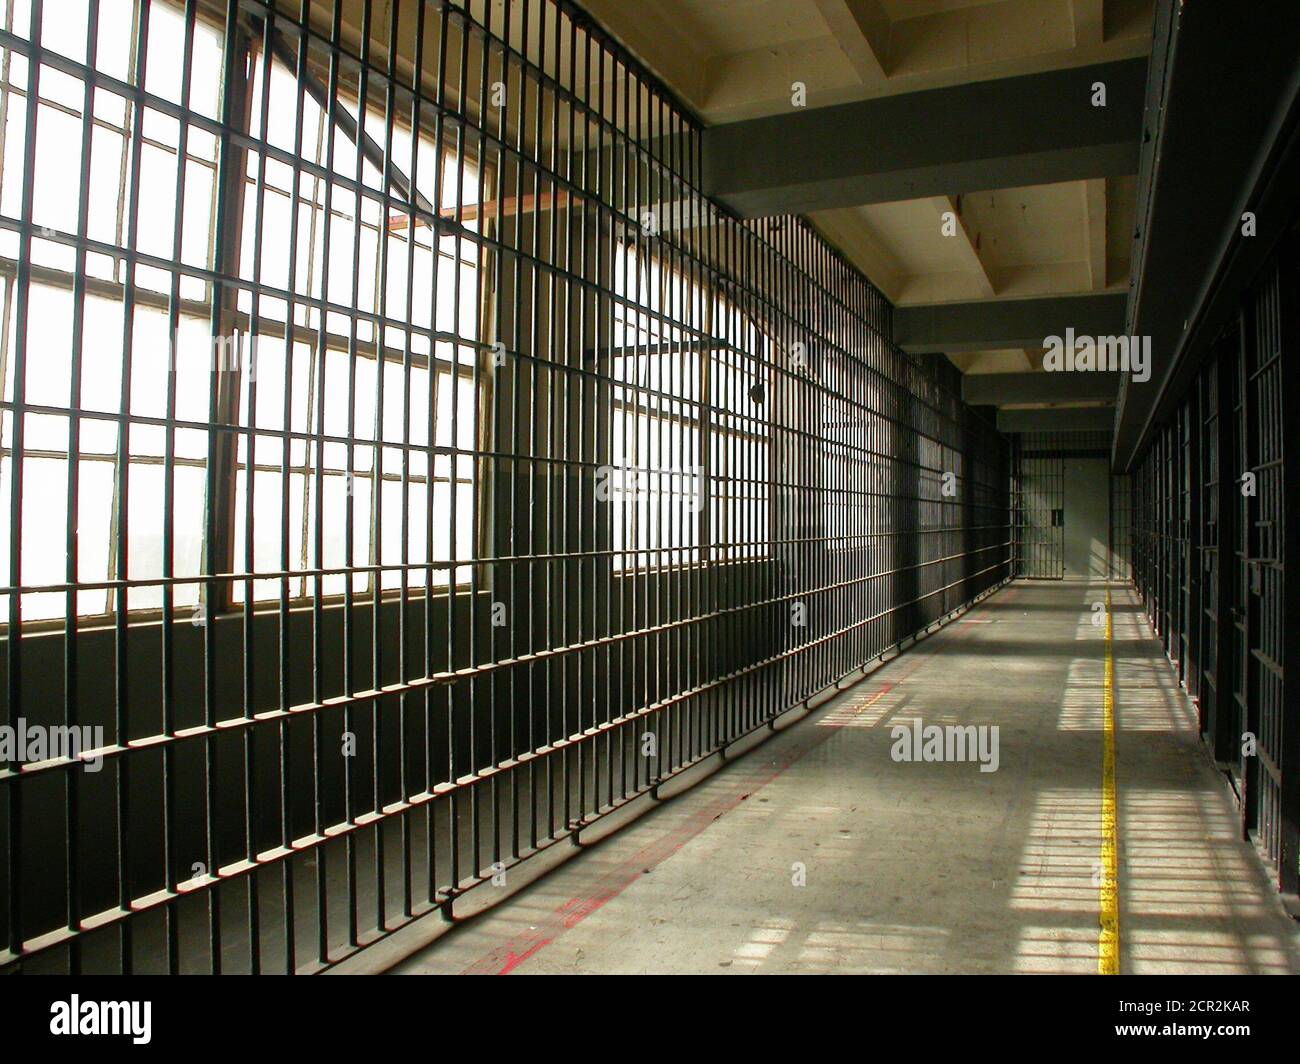 View towards bars and windows inside cell block inside old unused government city jail facility. Stock Photo